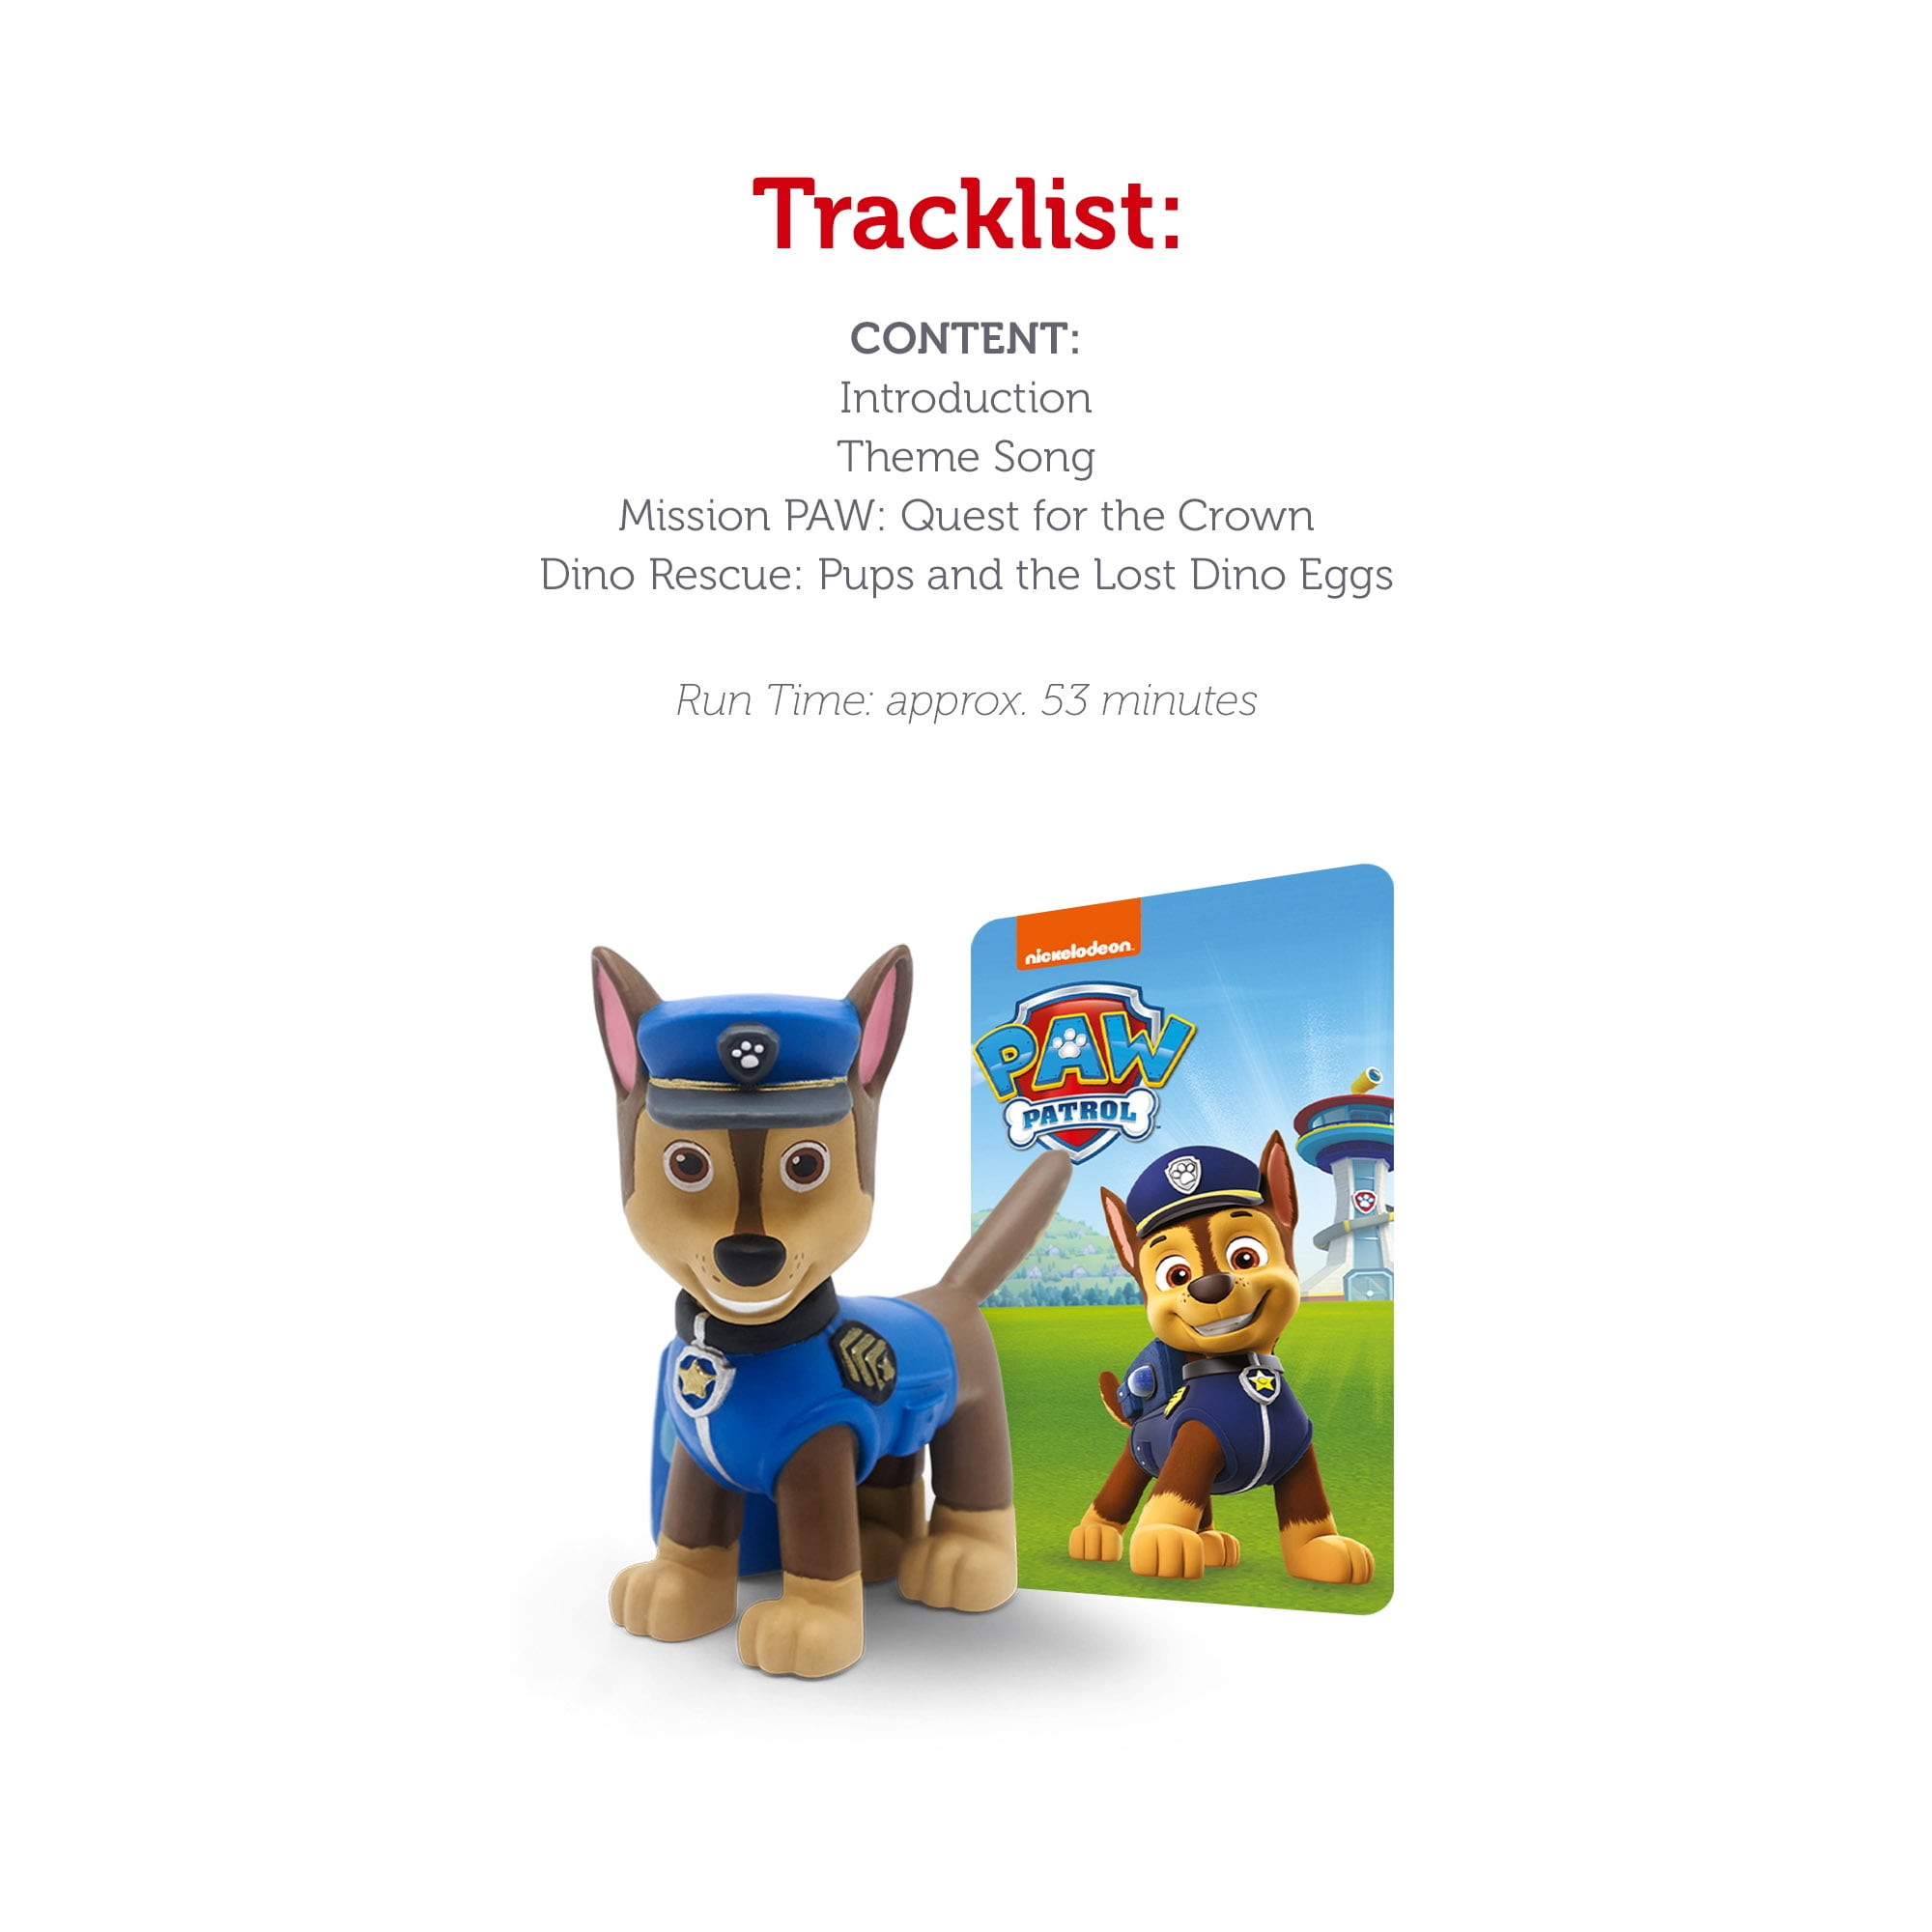  Tonies Zuma Audio Play Character from Paw Patrol : Toys & Games